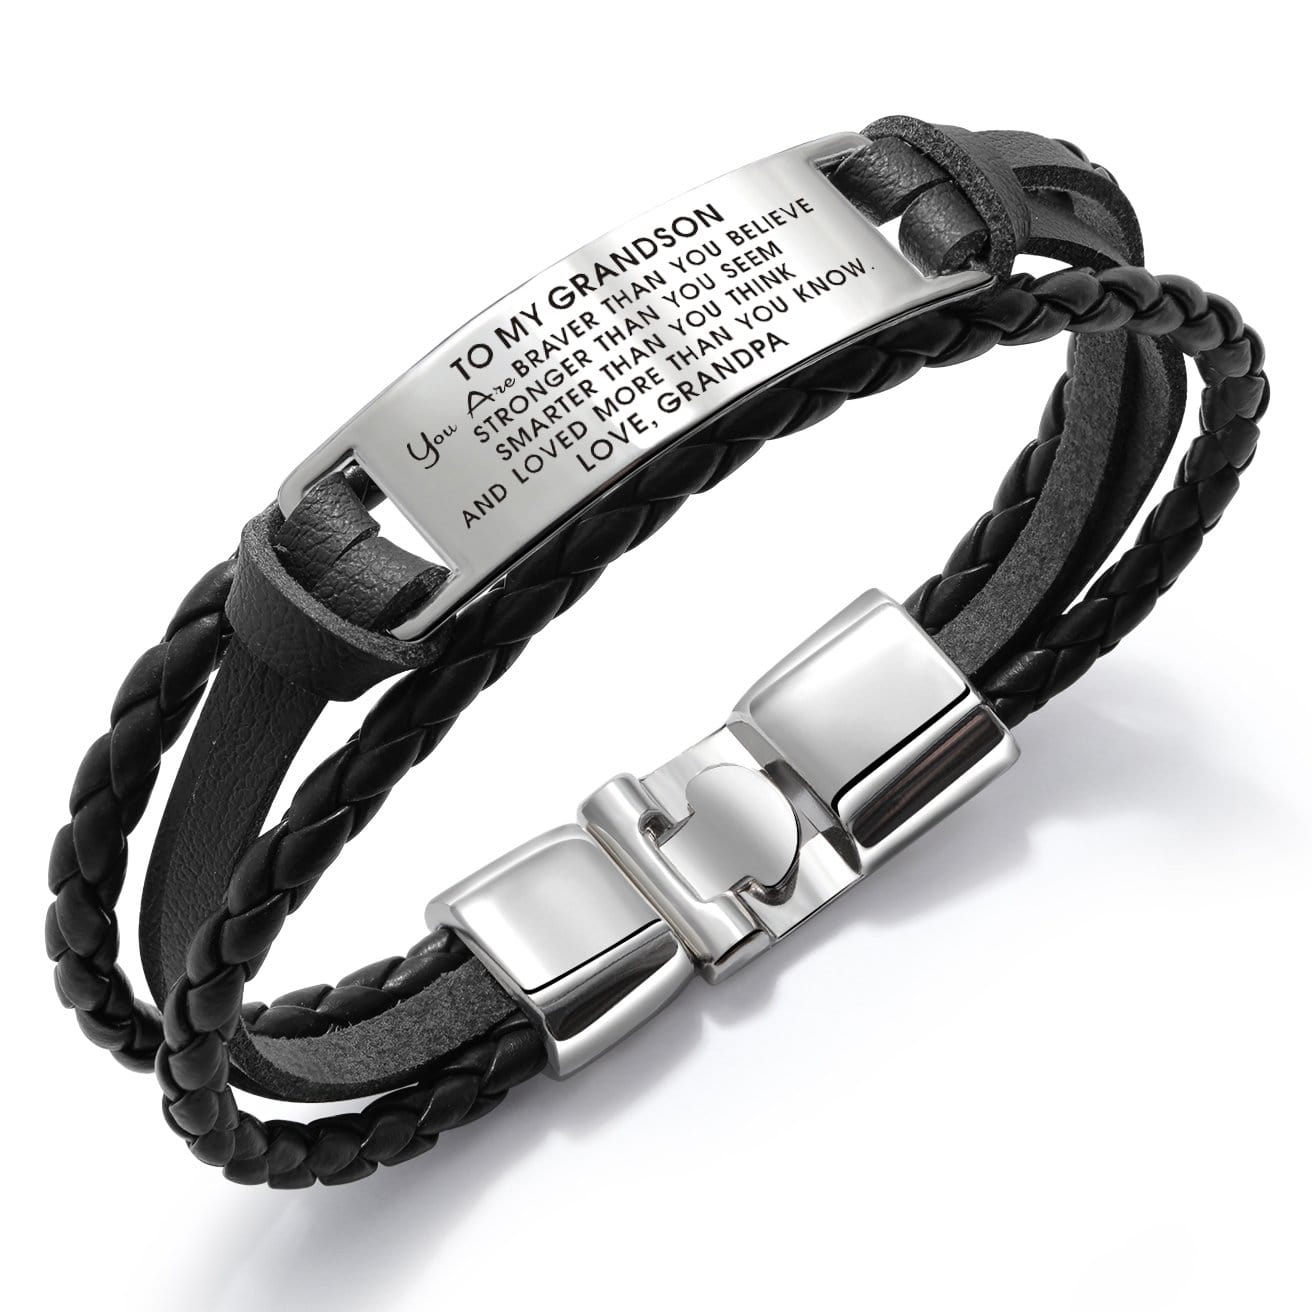 Bracelets Grandpa To Grandson - You Are Loved More Than You Know Leather Bracelet Black GiveMe-Gifts